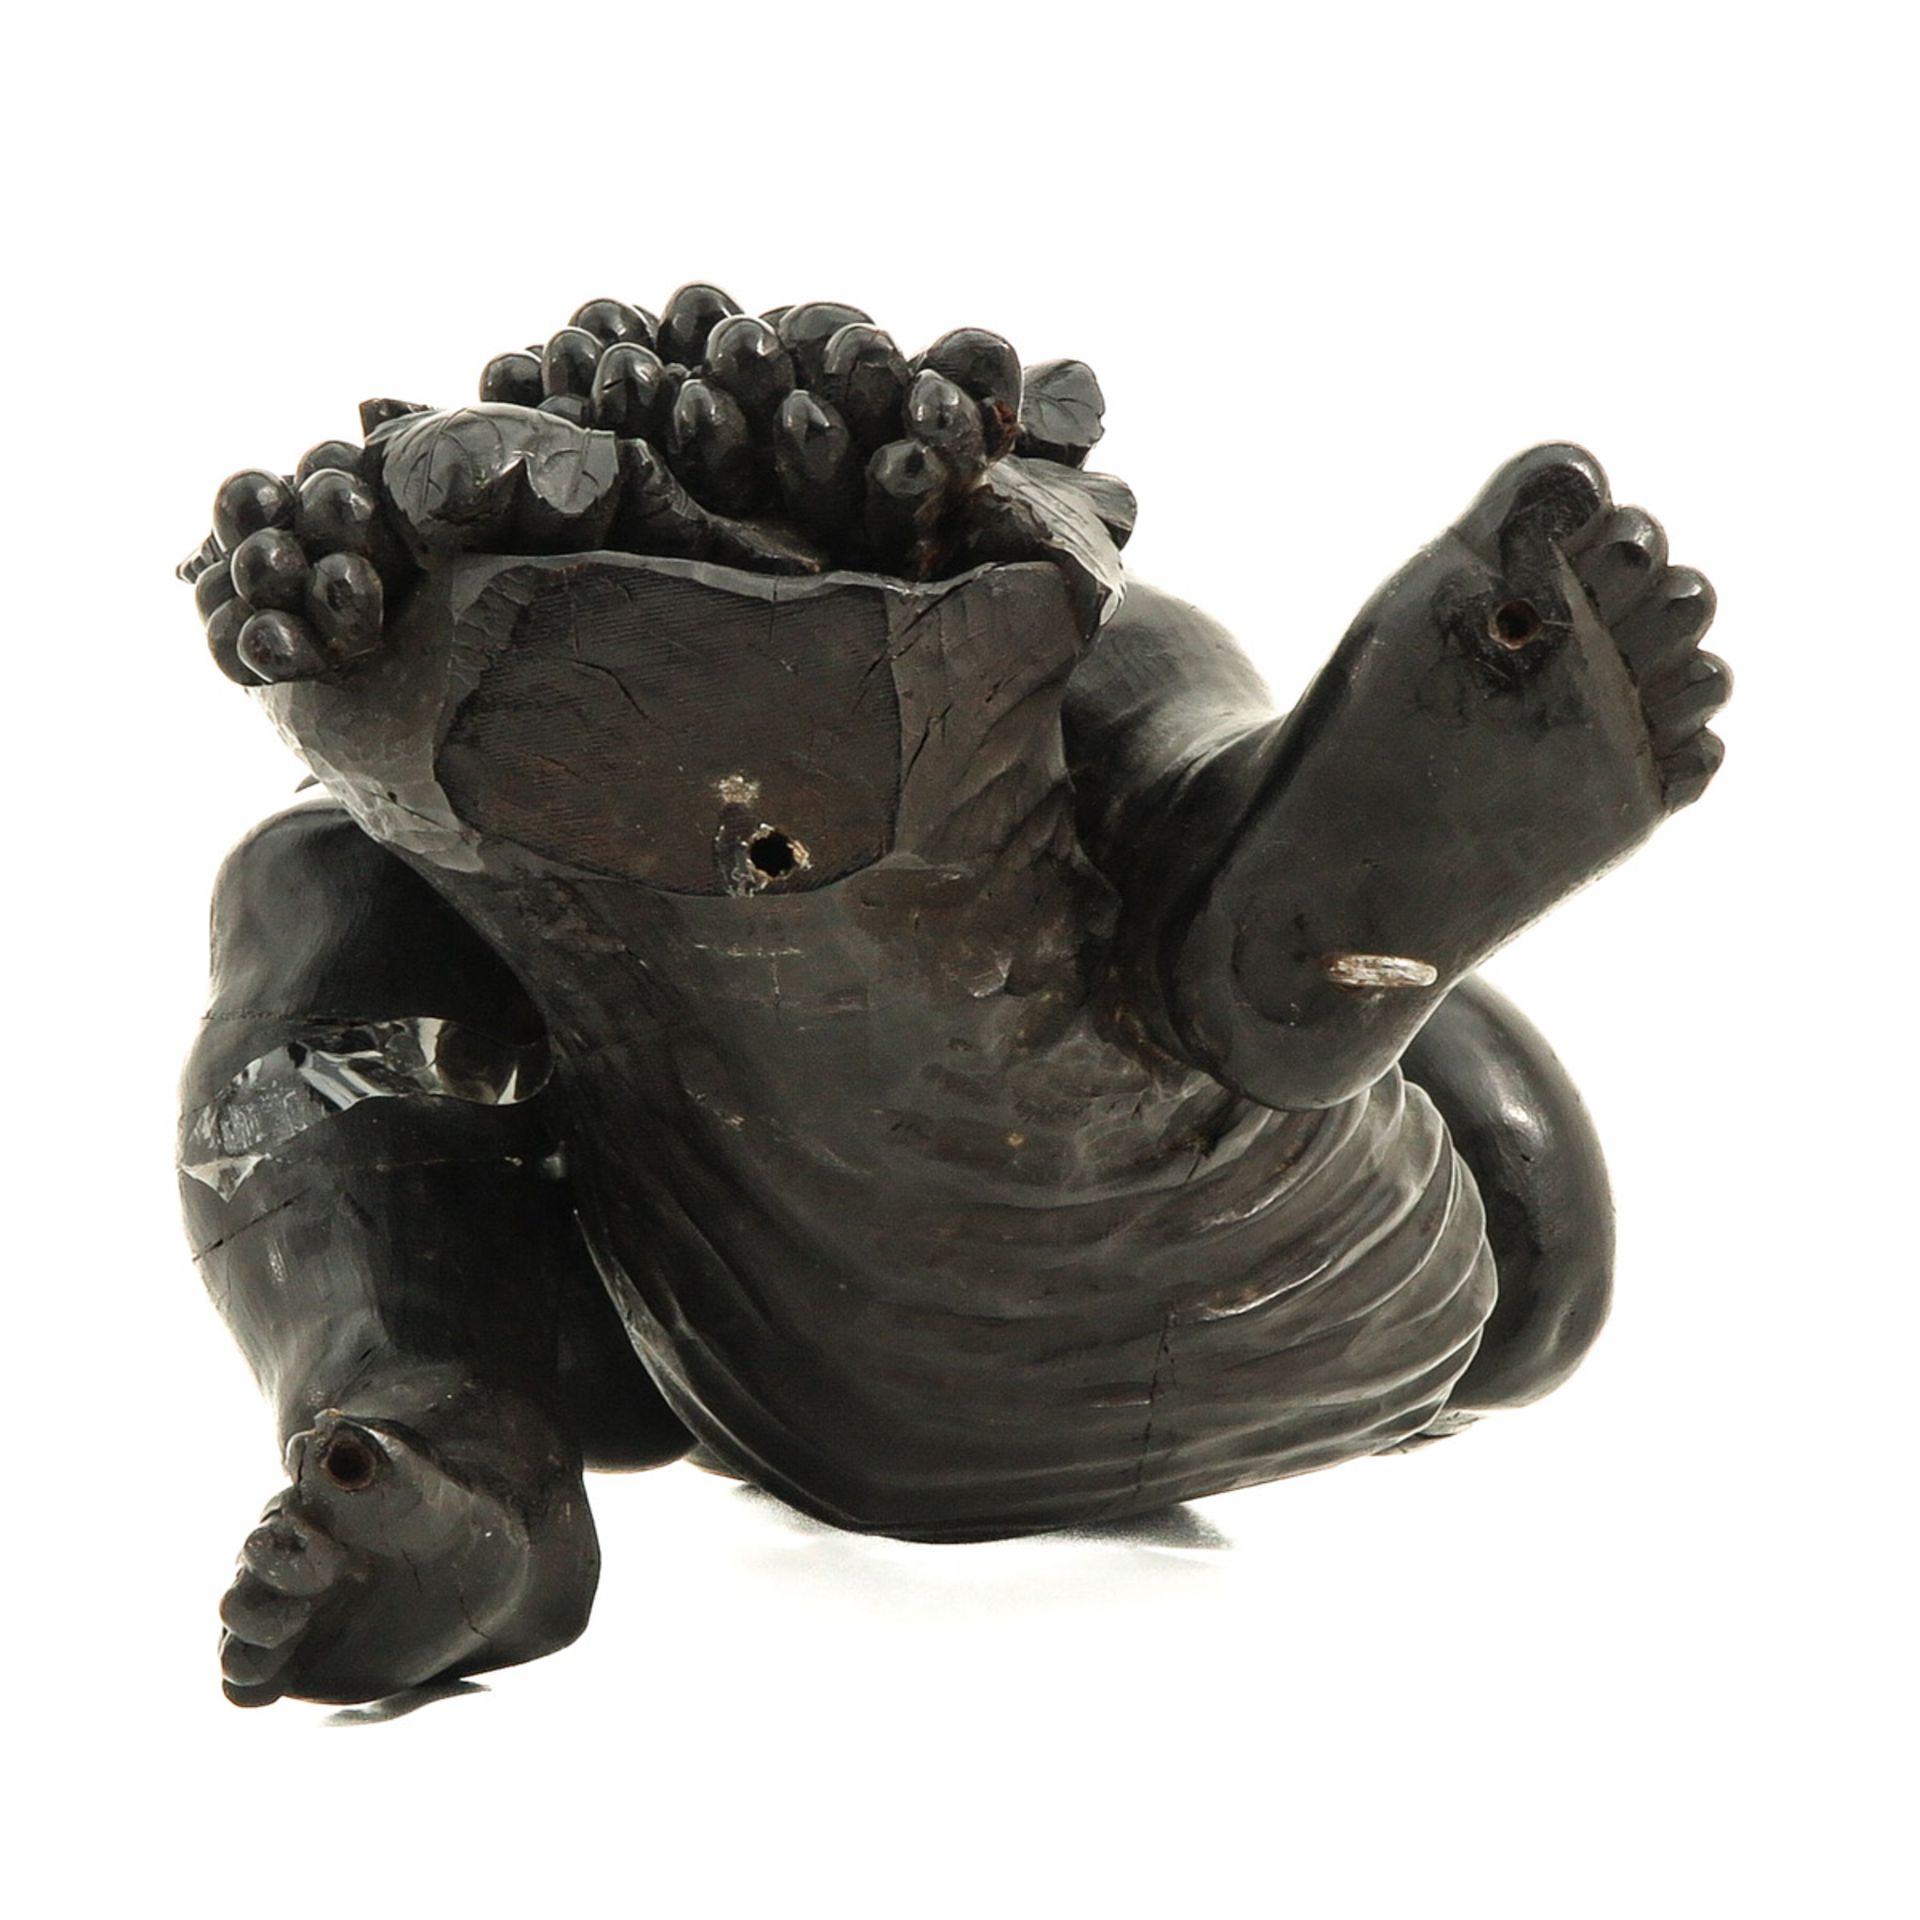 A Carved Wood Bacchus Sculpture - Image 6 of 8